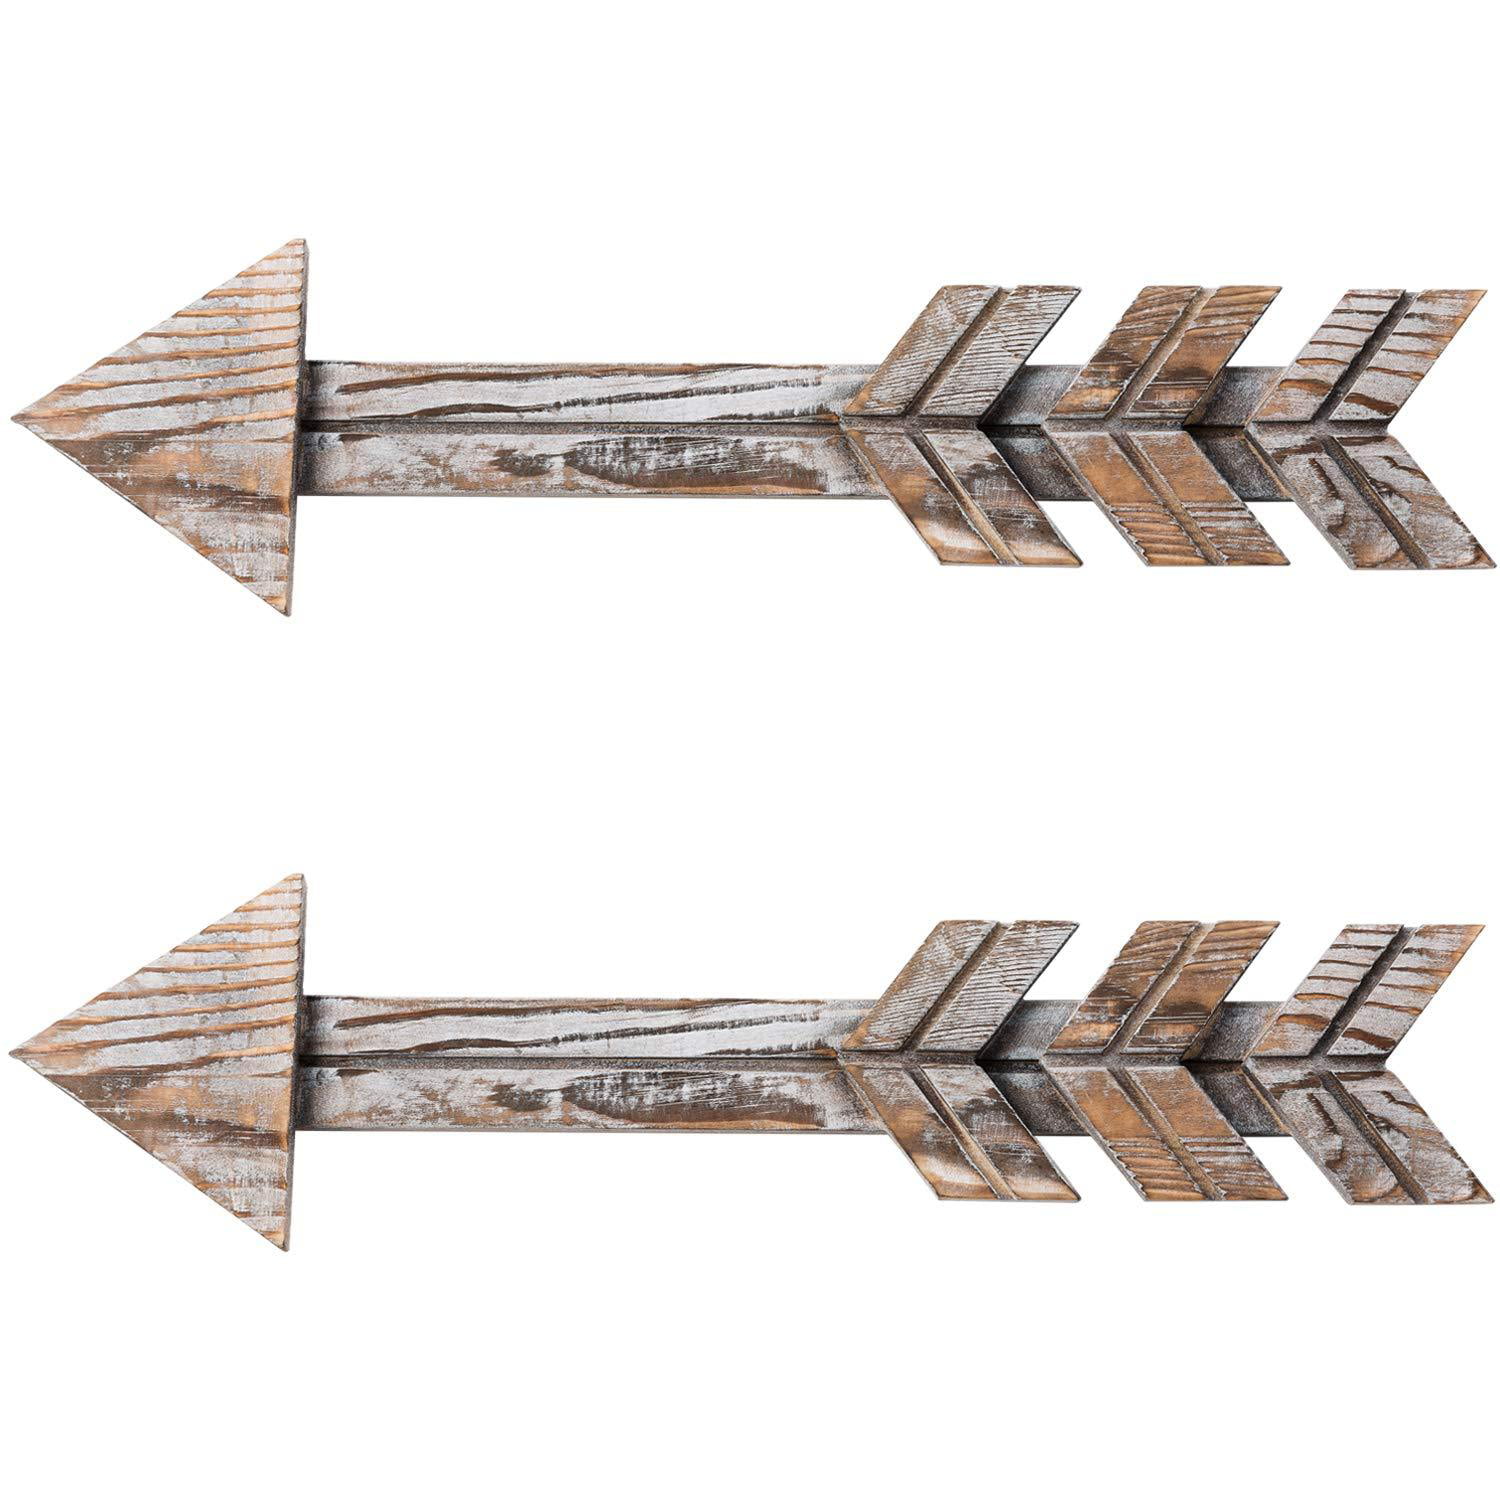 Wooden Arrows decoration - household items - by owner - housewares